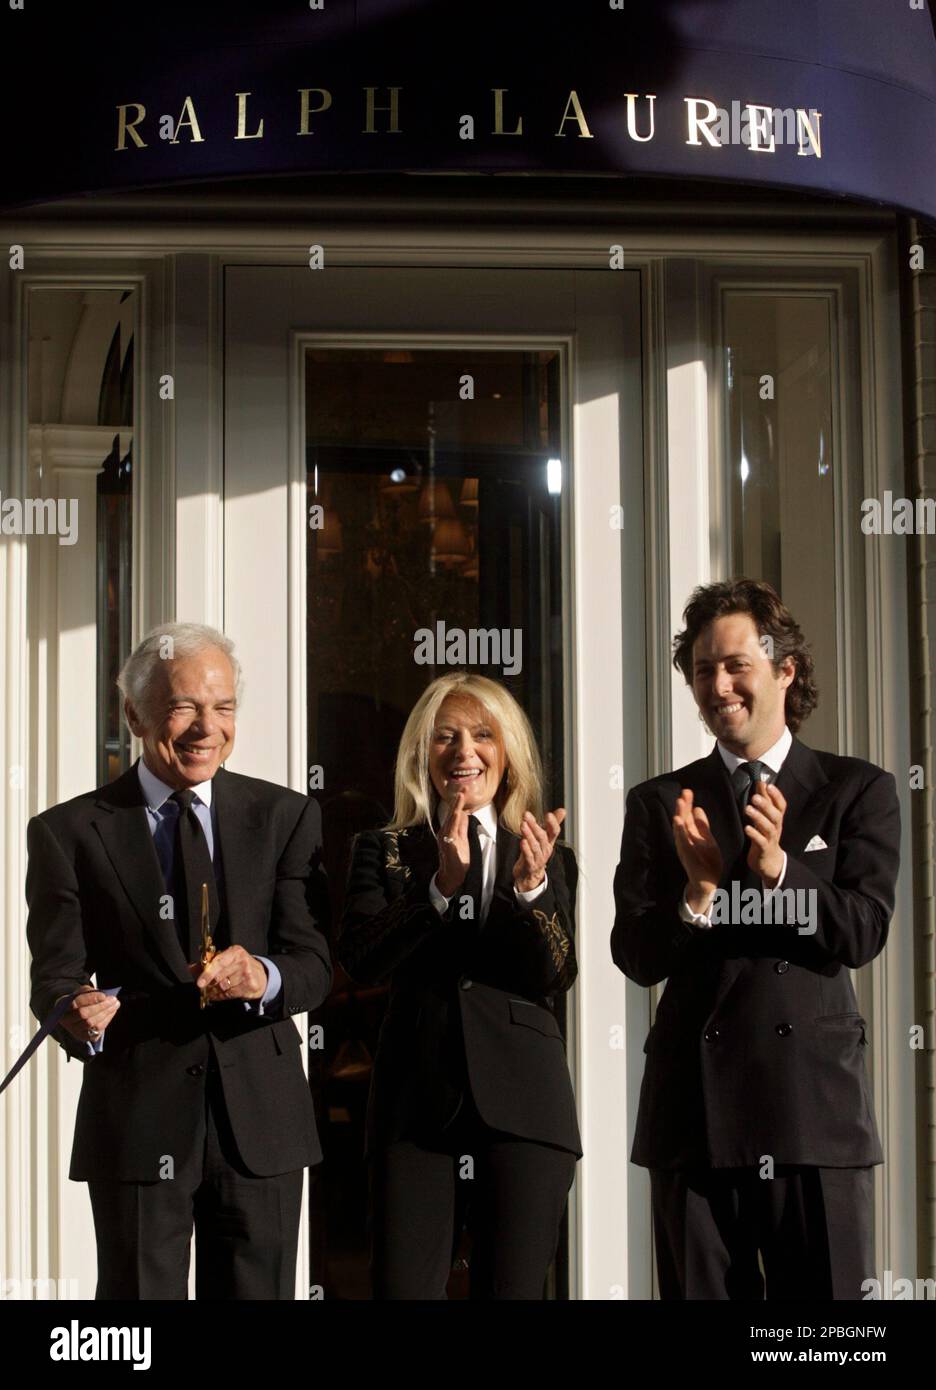 David Lauren on his fashionable father, and the future of Ralph